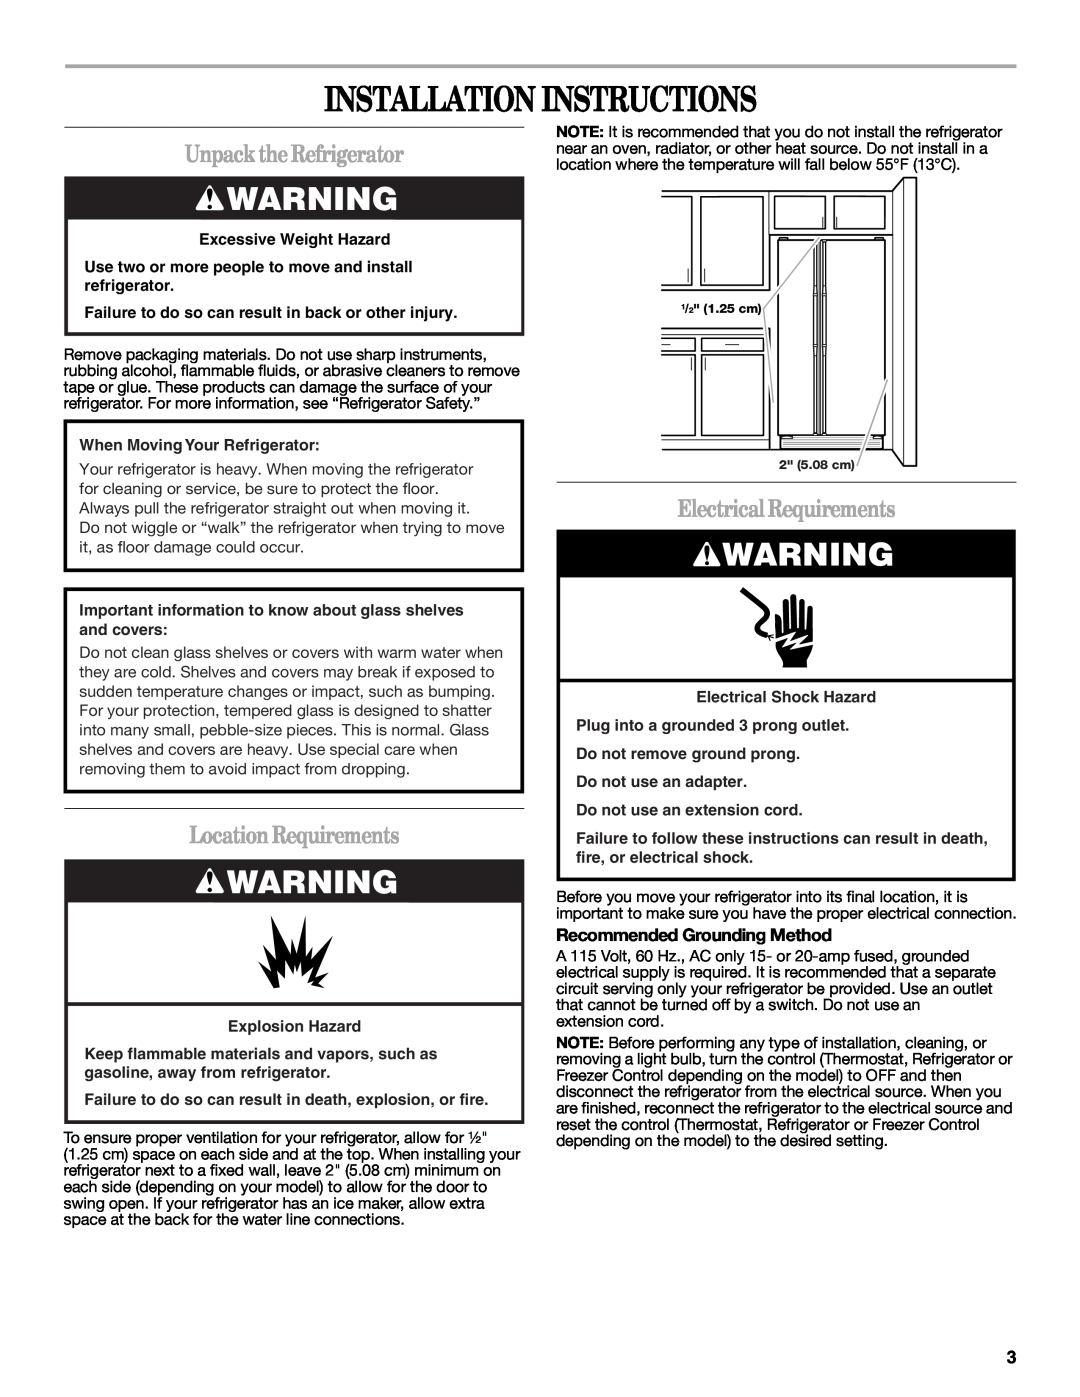 Whirlpool ED2PHEXNT00 Installation Instructions, UnpacktheRefrigerator, LocationRequirements, Electrical Requirements 